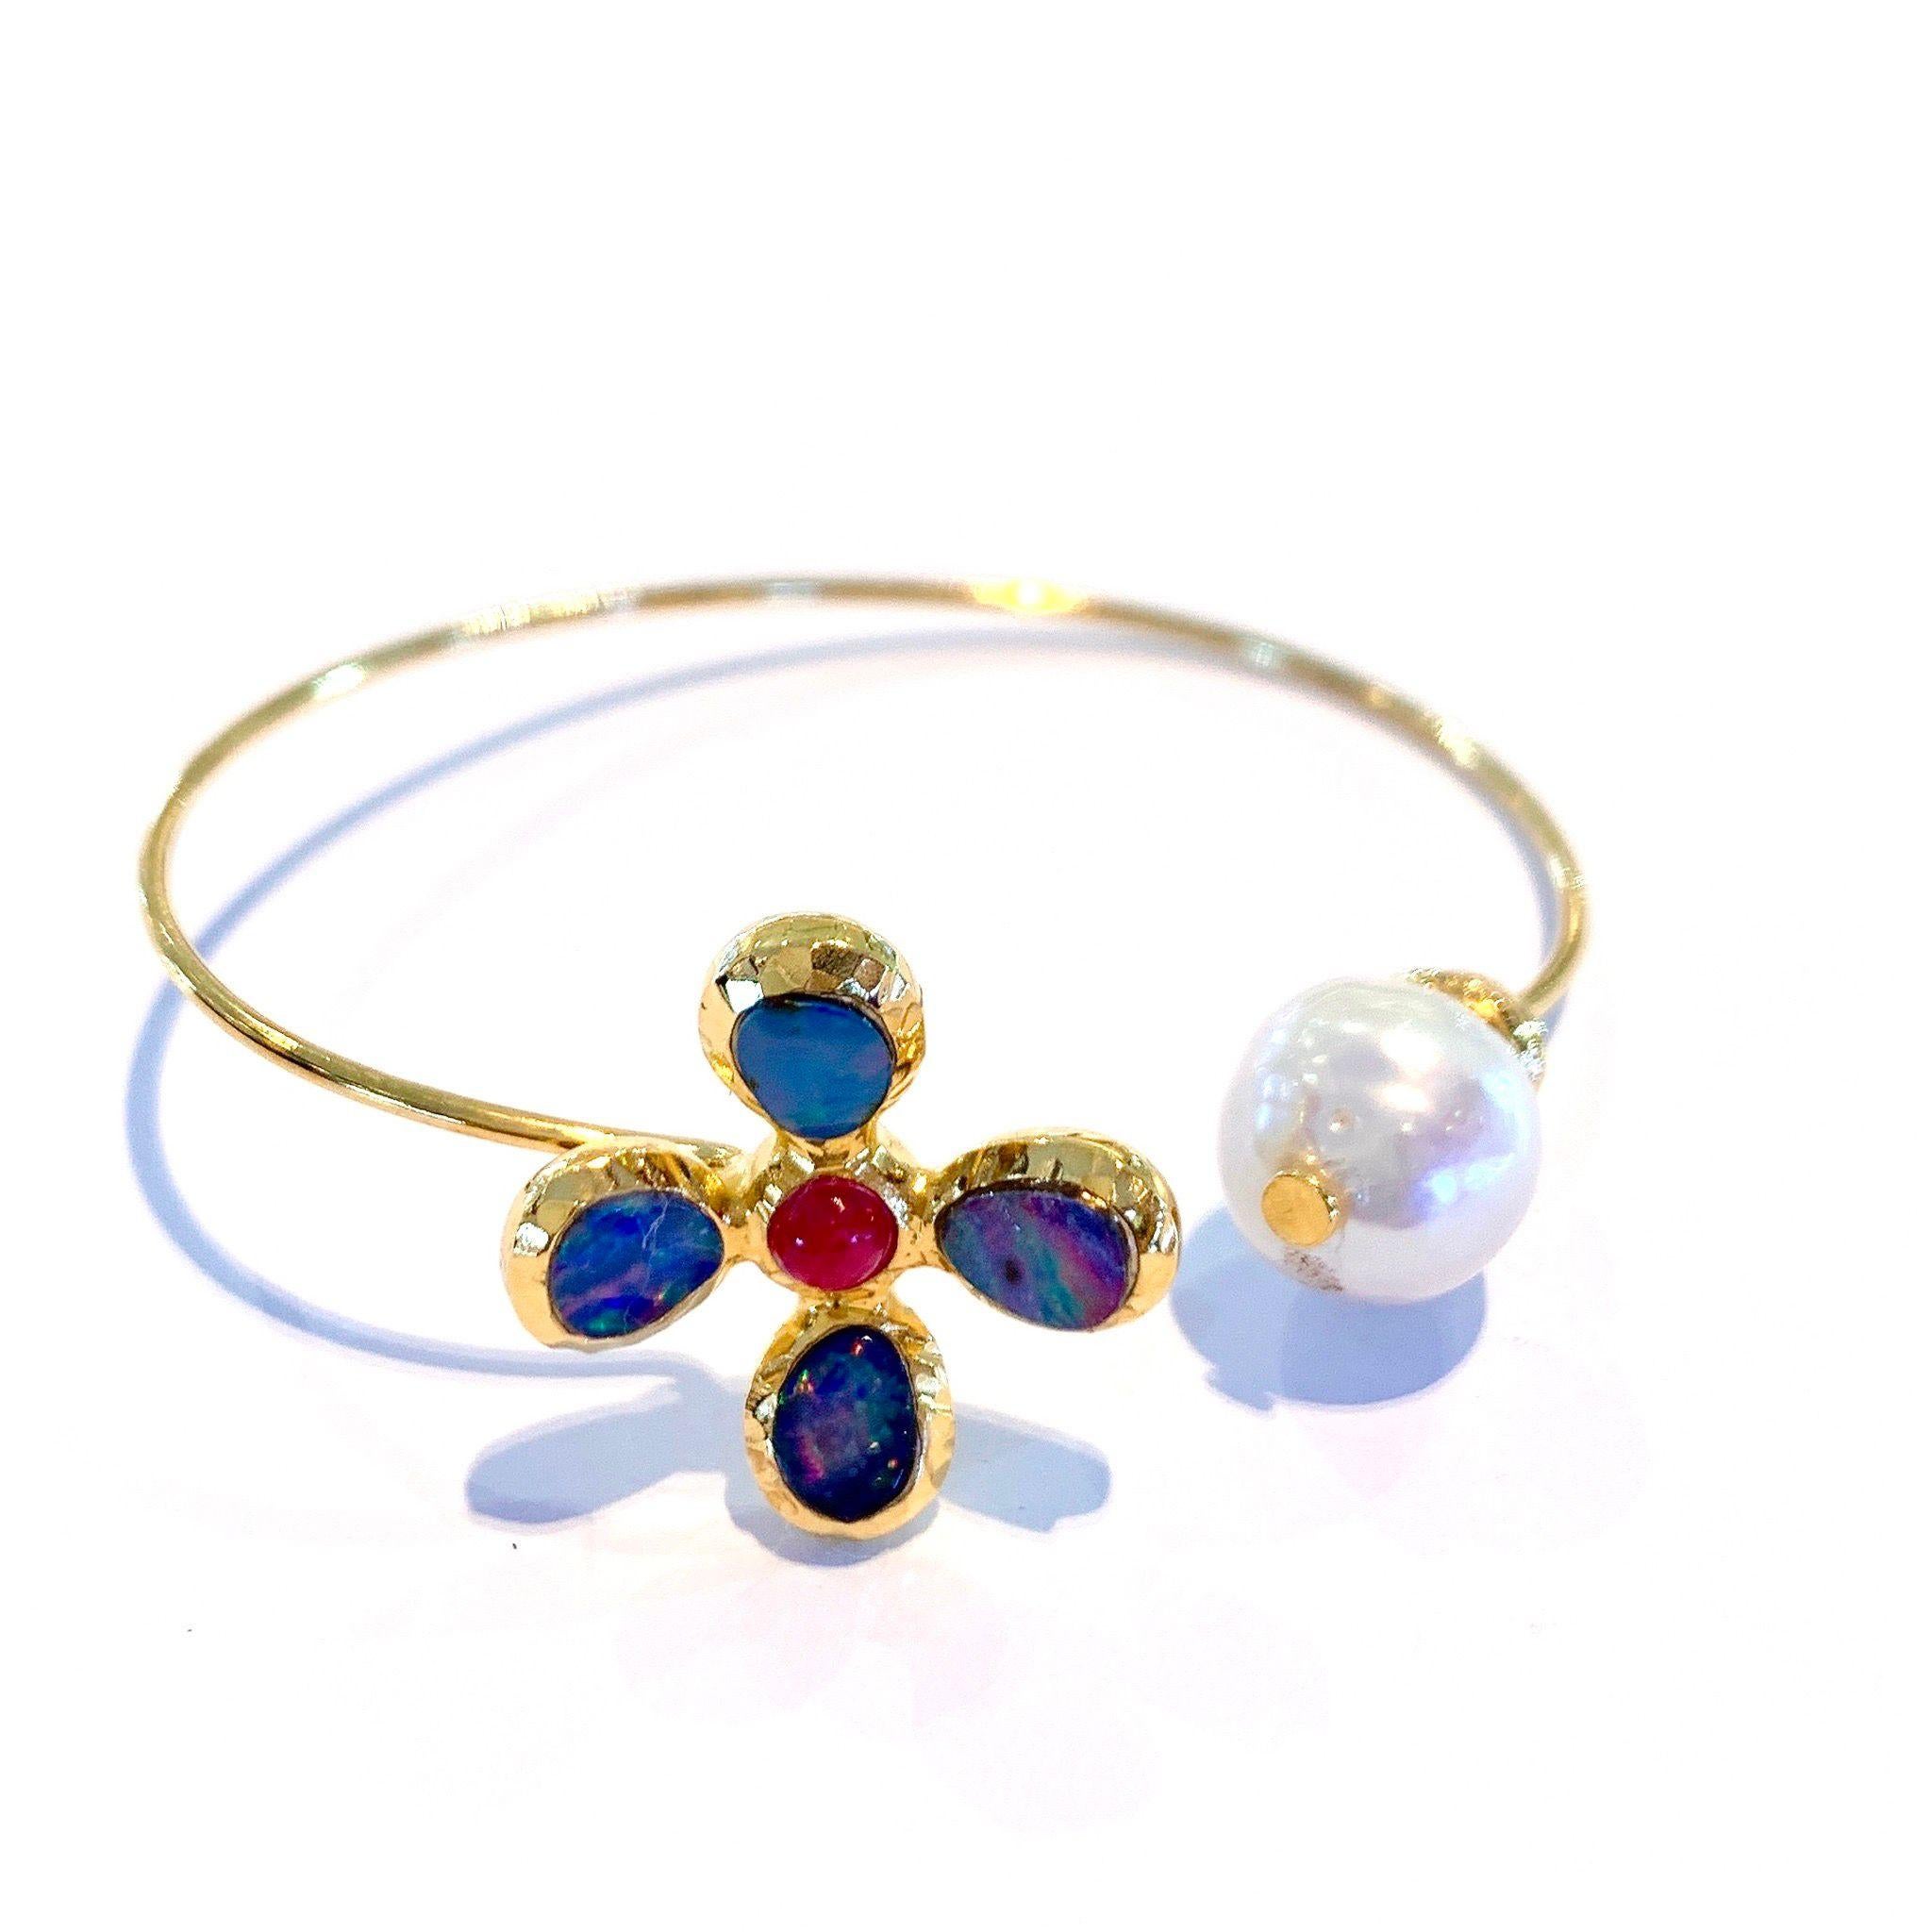 Bochic Opal and South sea Pearl Bangle, Silver and 22 K Gold 
Gold is 22K plating that is 3 microns 
Natural Blue Opal 
Natural shape 
3 carats 
Baroque south sea pearl 
White color, silver and pink tone 
Natural Red Ruby 
Cabochon
1 .5 carat